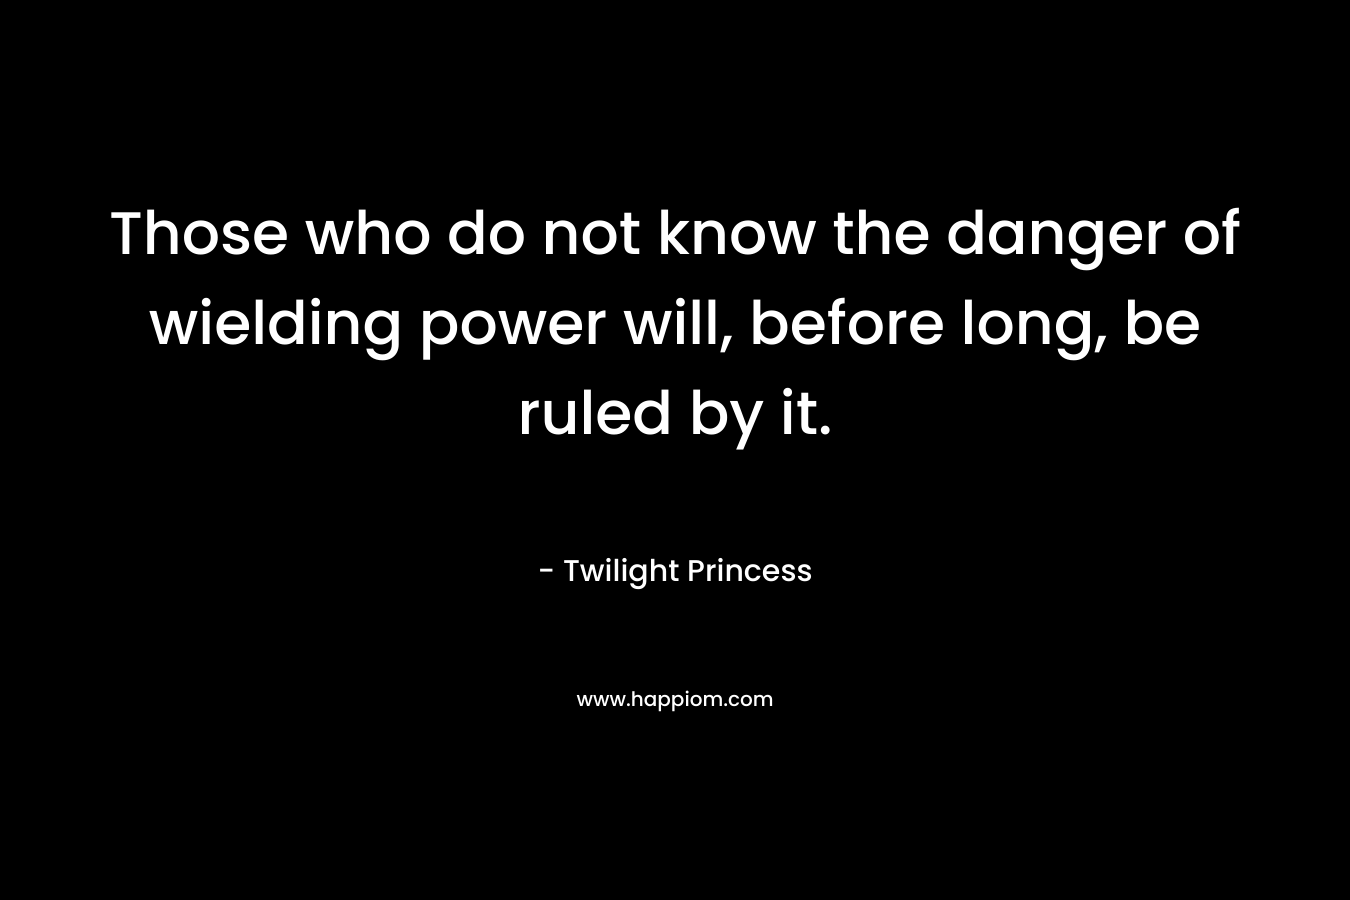 Those who do not know the danger of wielding power will, before long, be ruled by it. – Twilight Princess